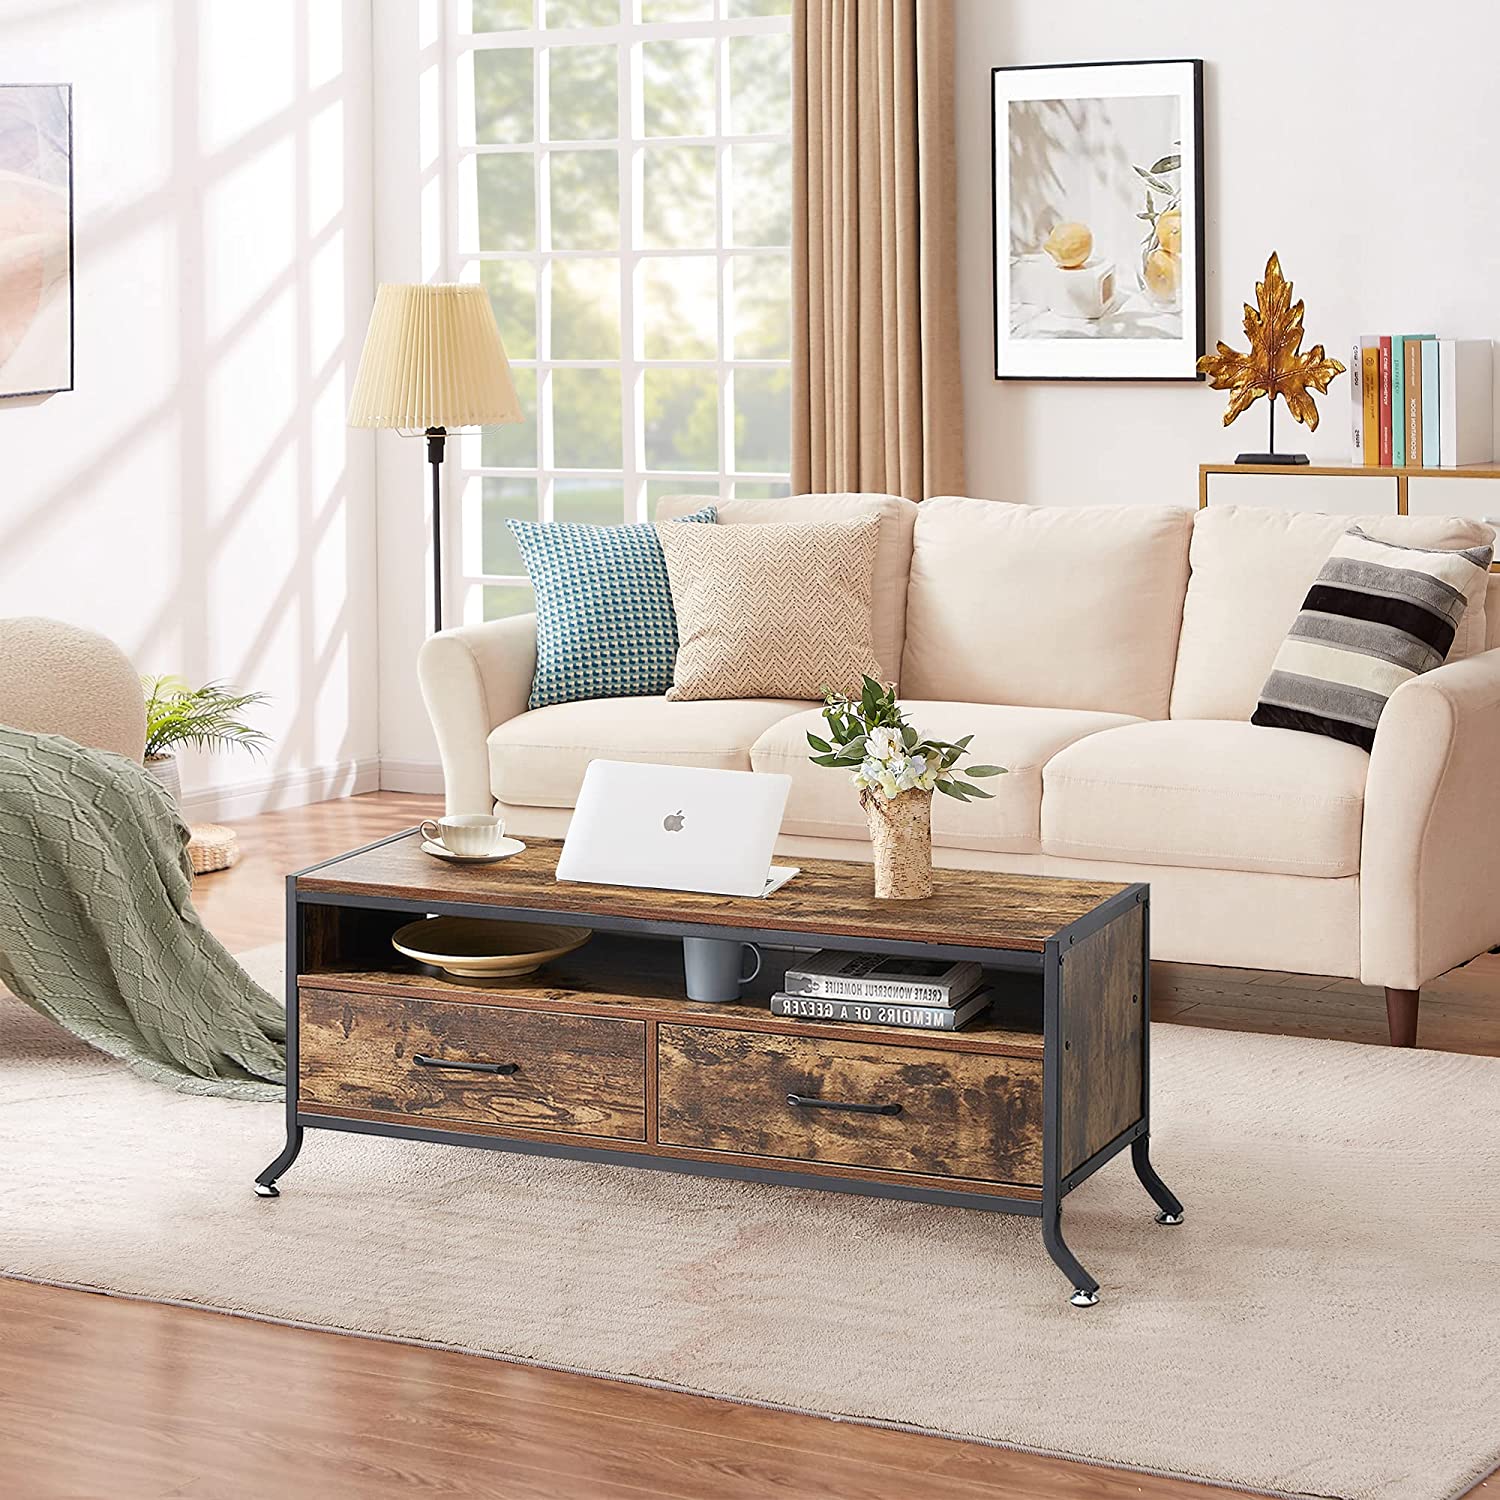 VECELO Industrial TV Stand/Television Cabinet/Coffee Table with Open Storage Console & Two Drawers